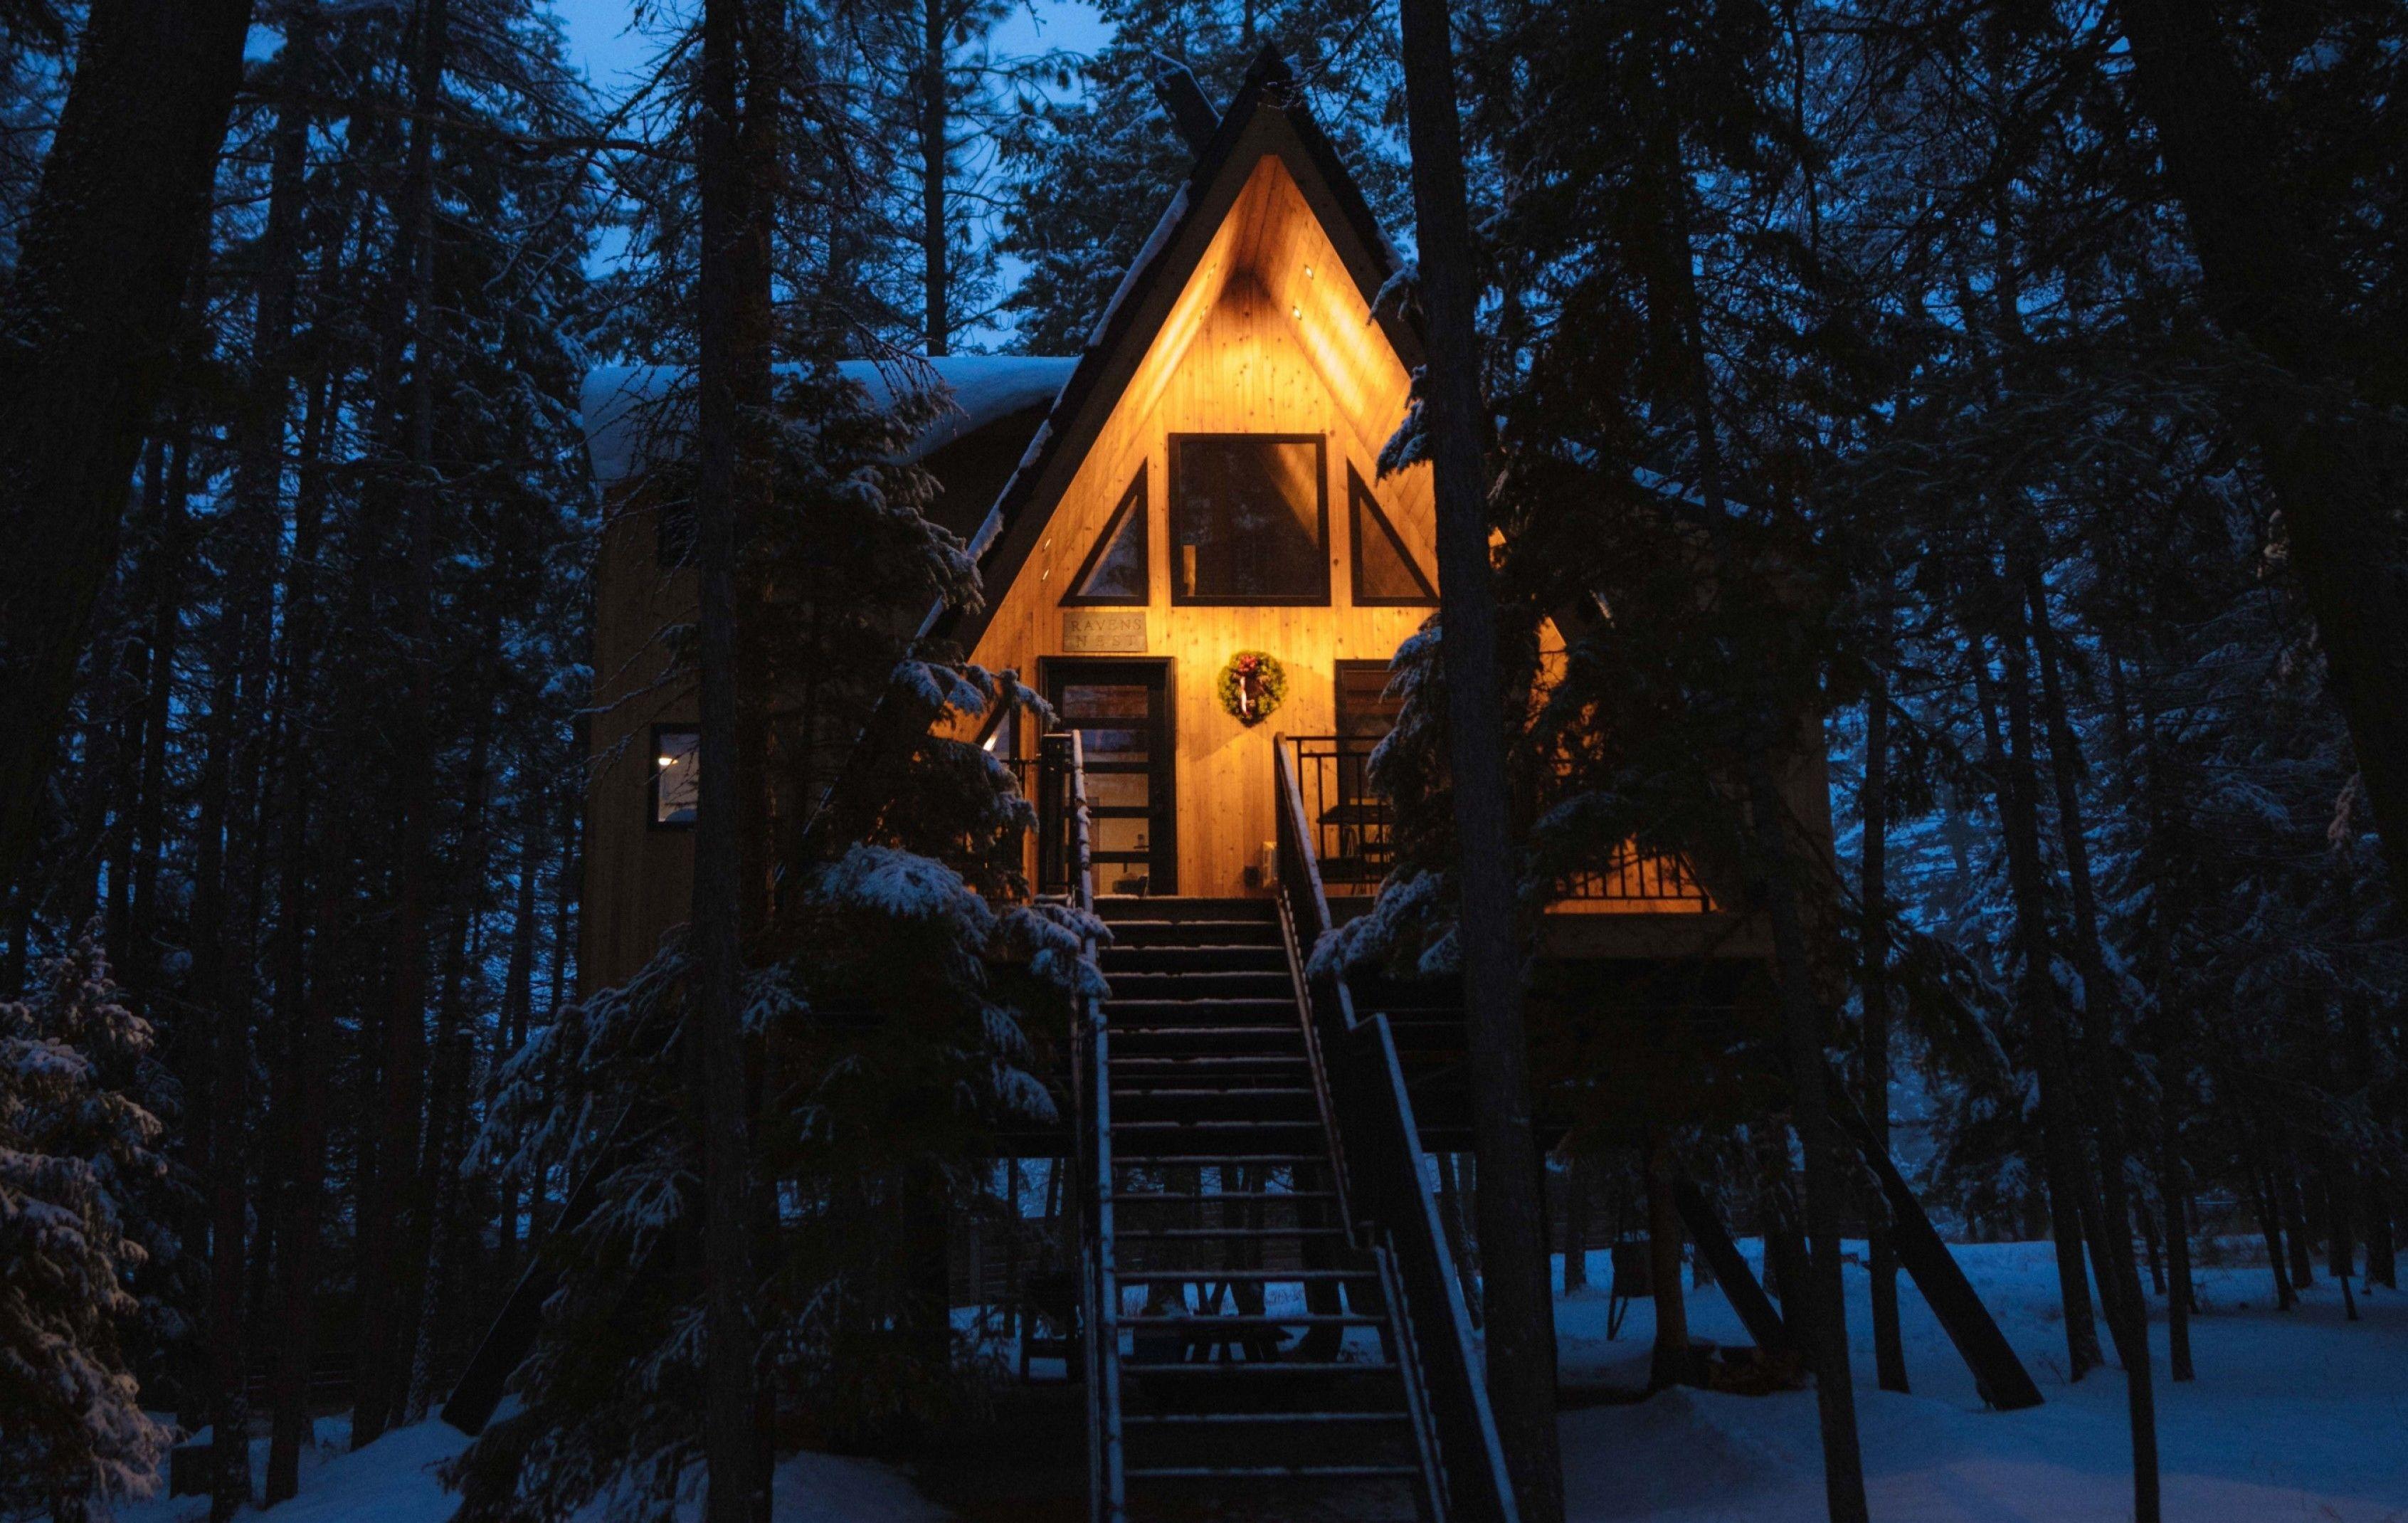 Kuhl gift guide with a scene of a cabin in the forest